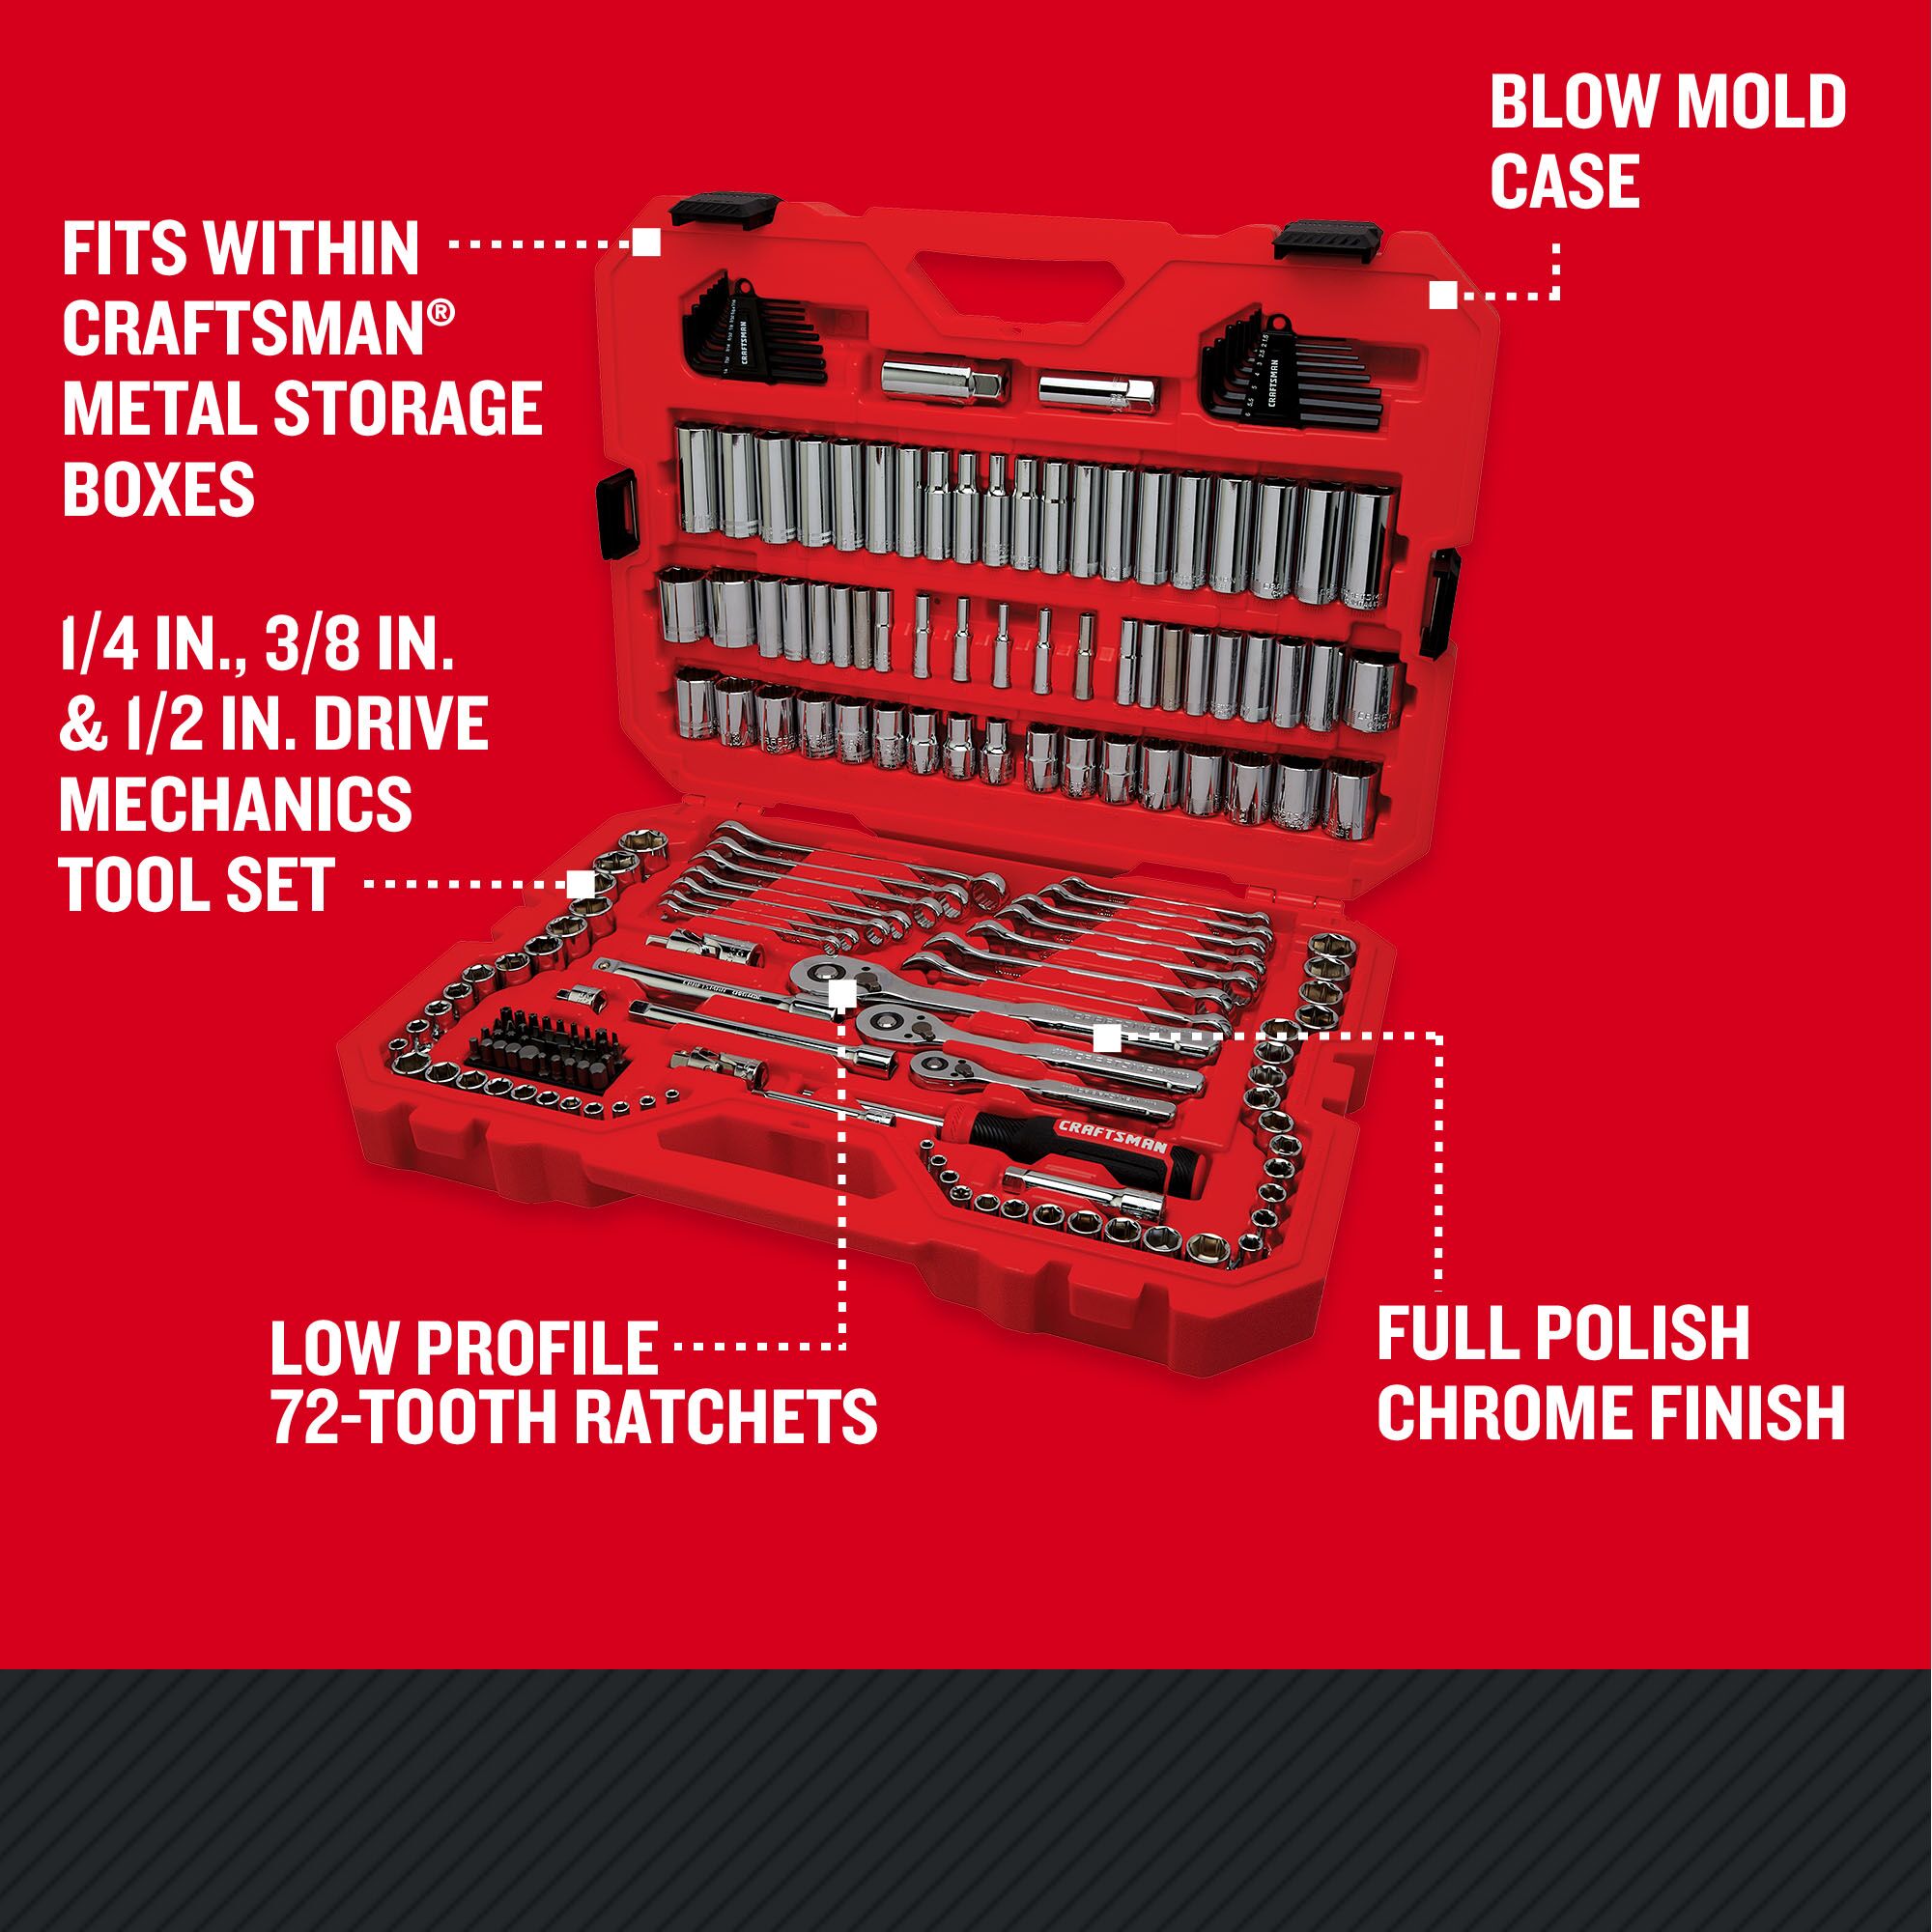 CRAFTSMAN Low Profile 189 piece MECHANICS TOOL SET with features and benefits highlighted